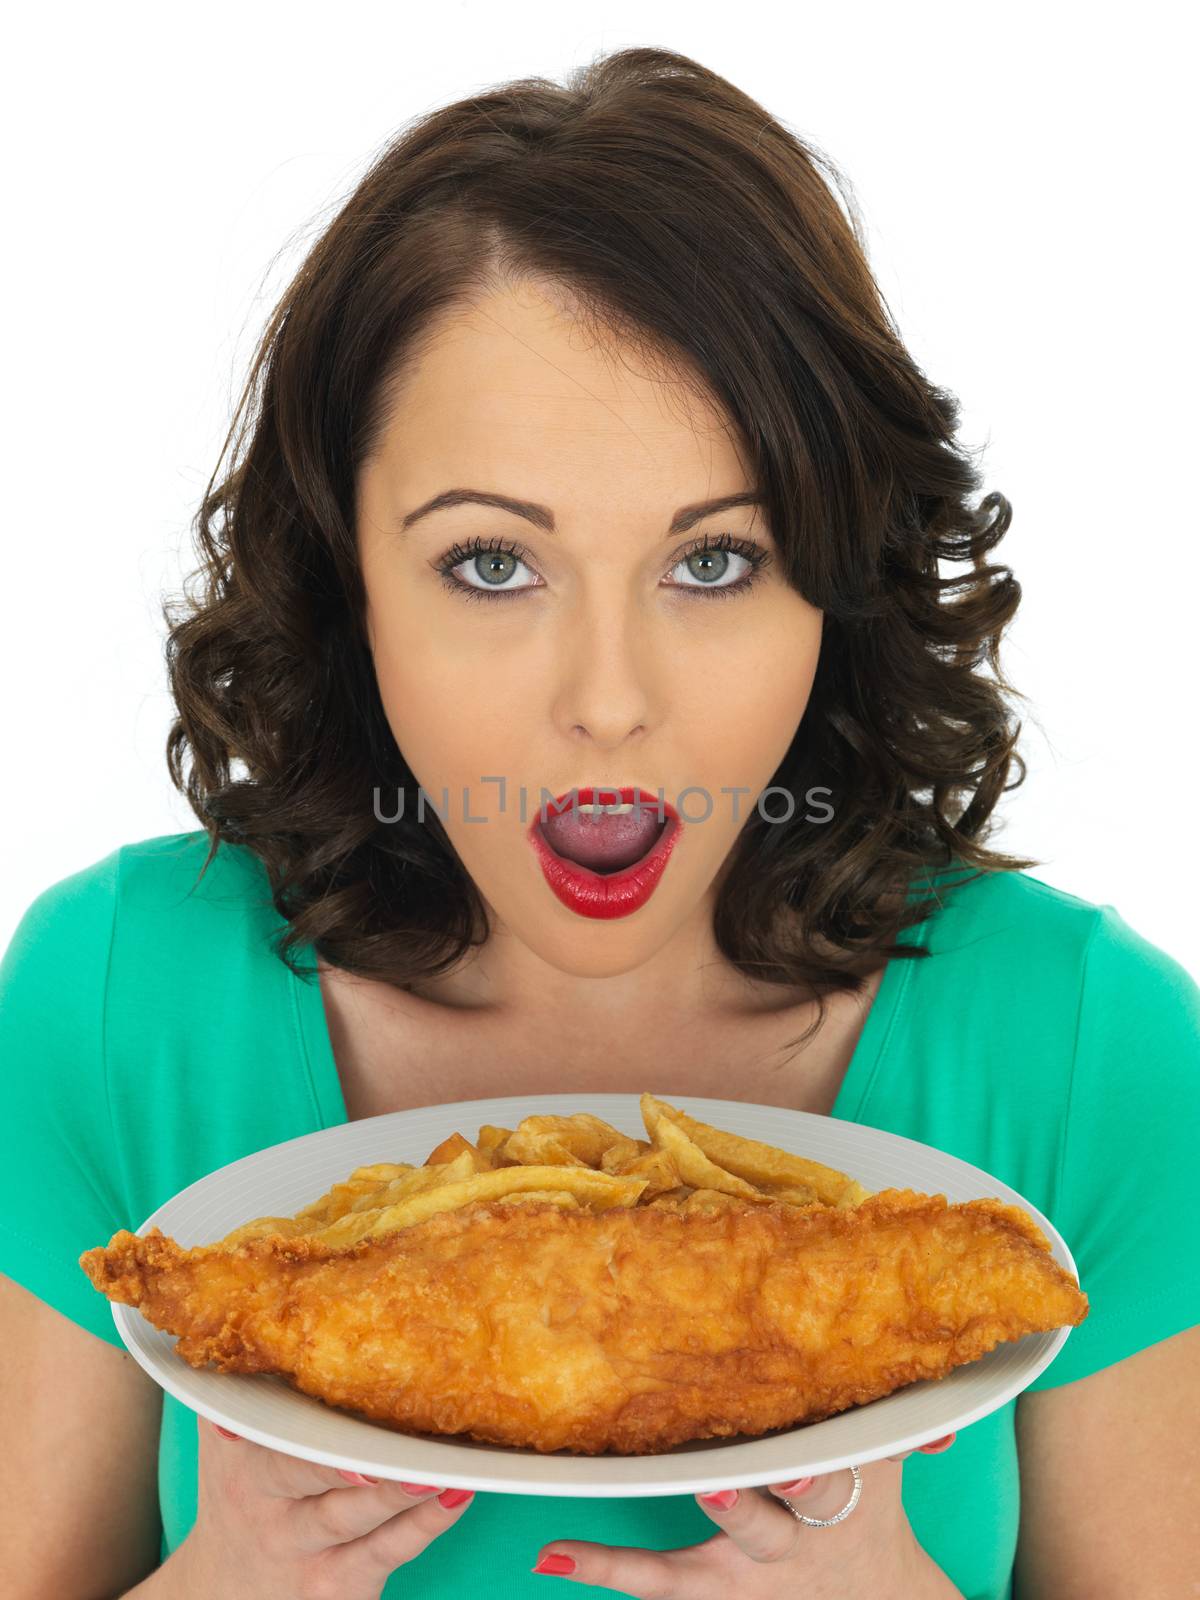 Attractive Young Woman Eating Traditional Fish and Chips